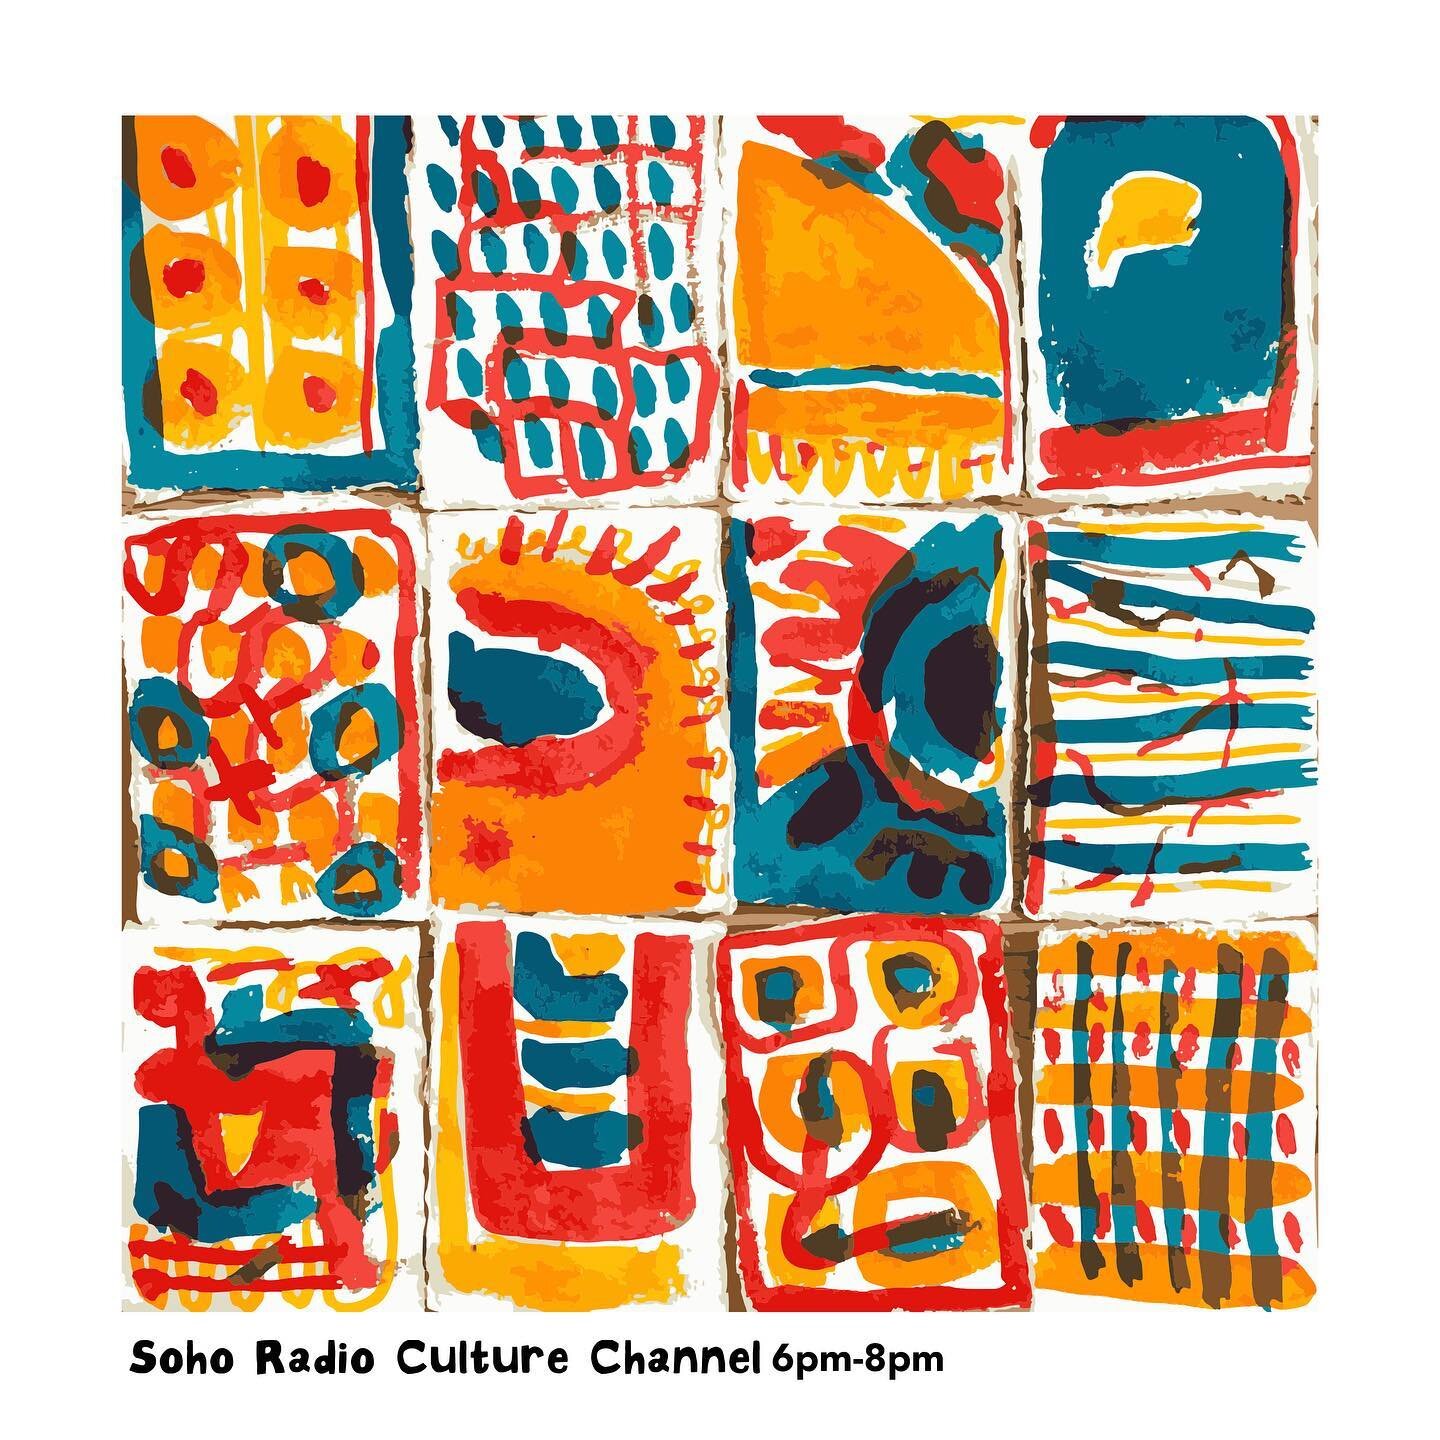 Drawing On Air is on @sohoradio culture channel this evening 6pm-8pm (after my good friends @imaginarymillions ) Listen to music and draw! Featuring tracks by @harriettmusic 4 Hero, Afronaught, Gal Costa, Sault, Oneness of JuJu, Bobbi Humphrey and ma